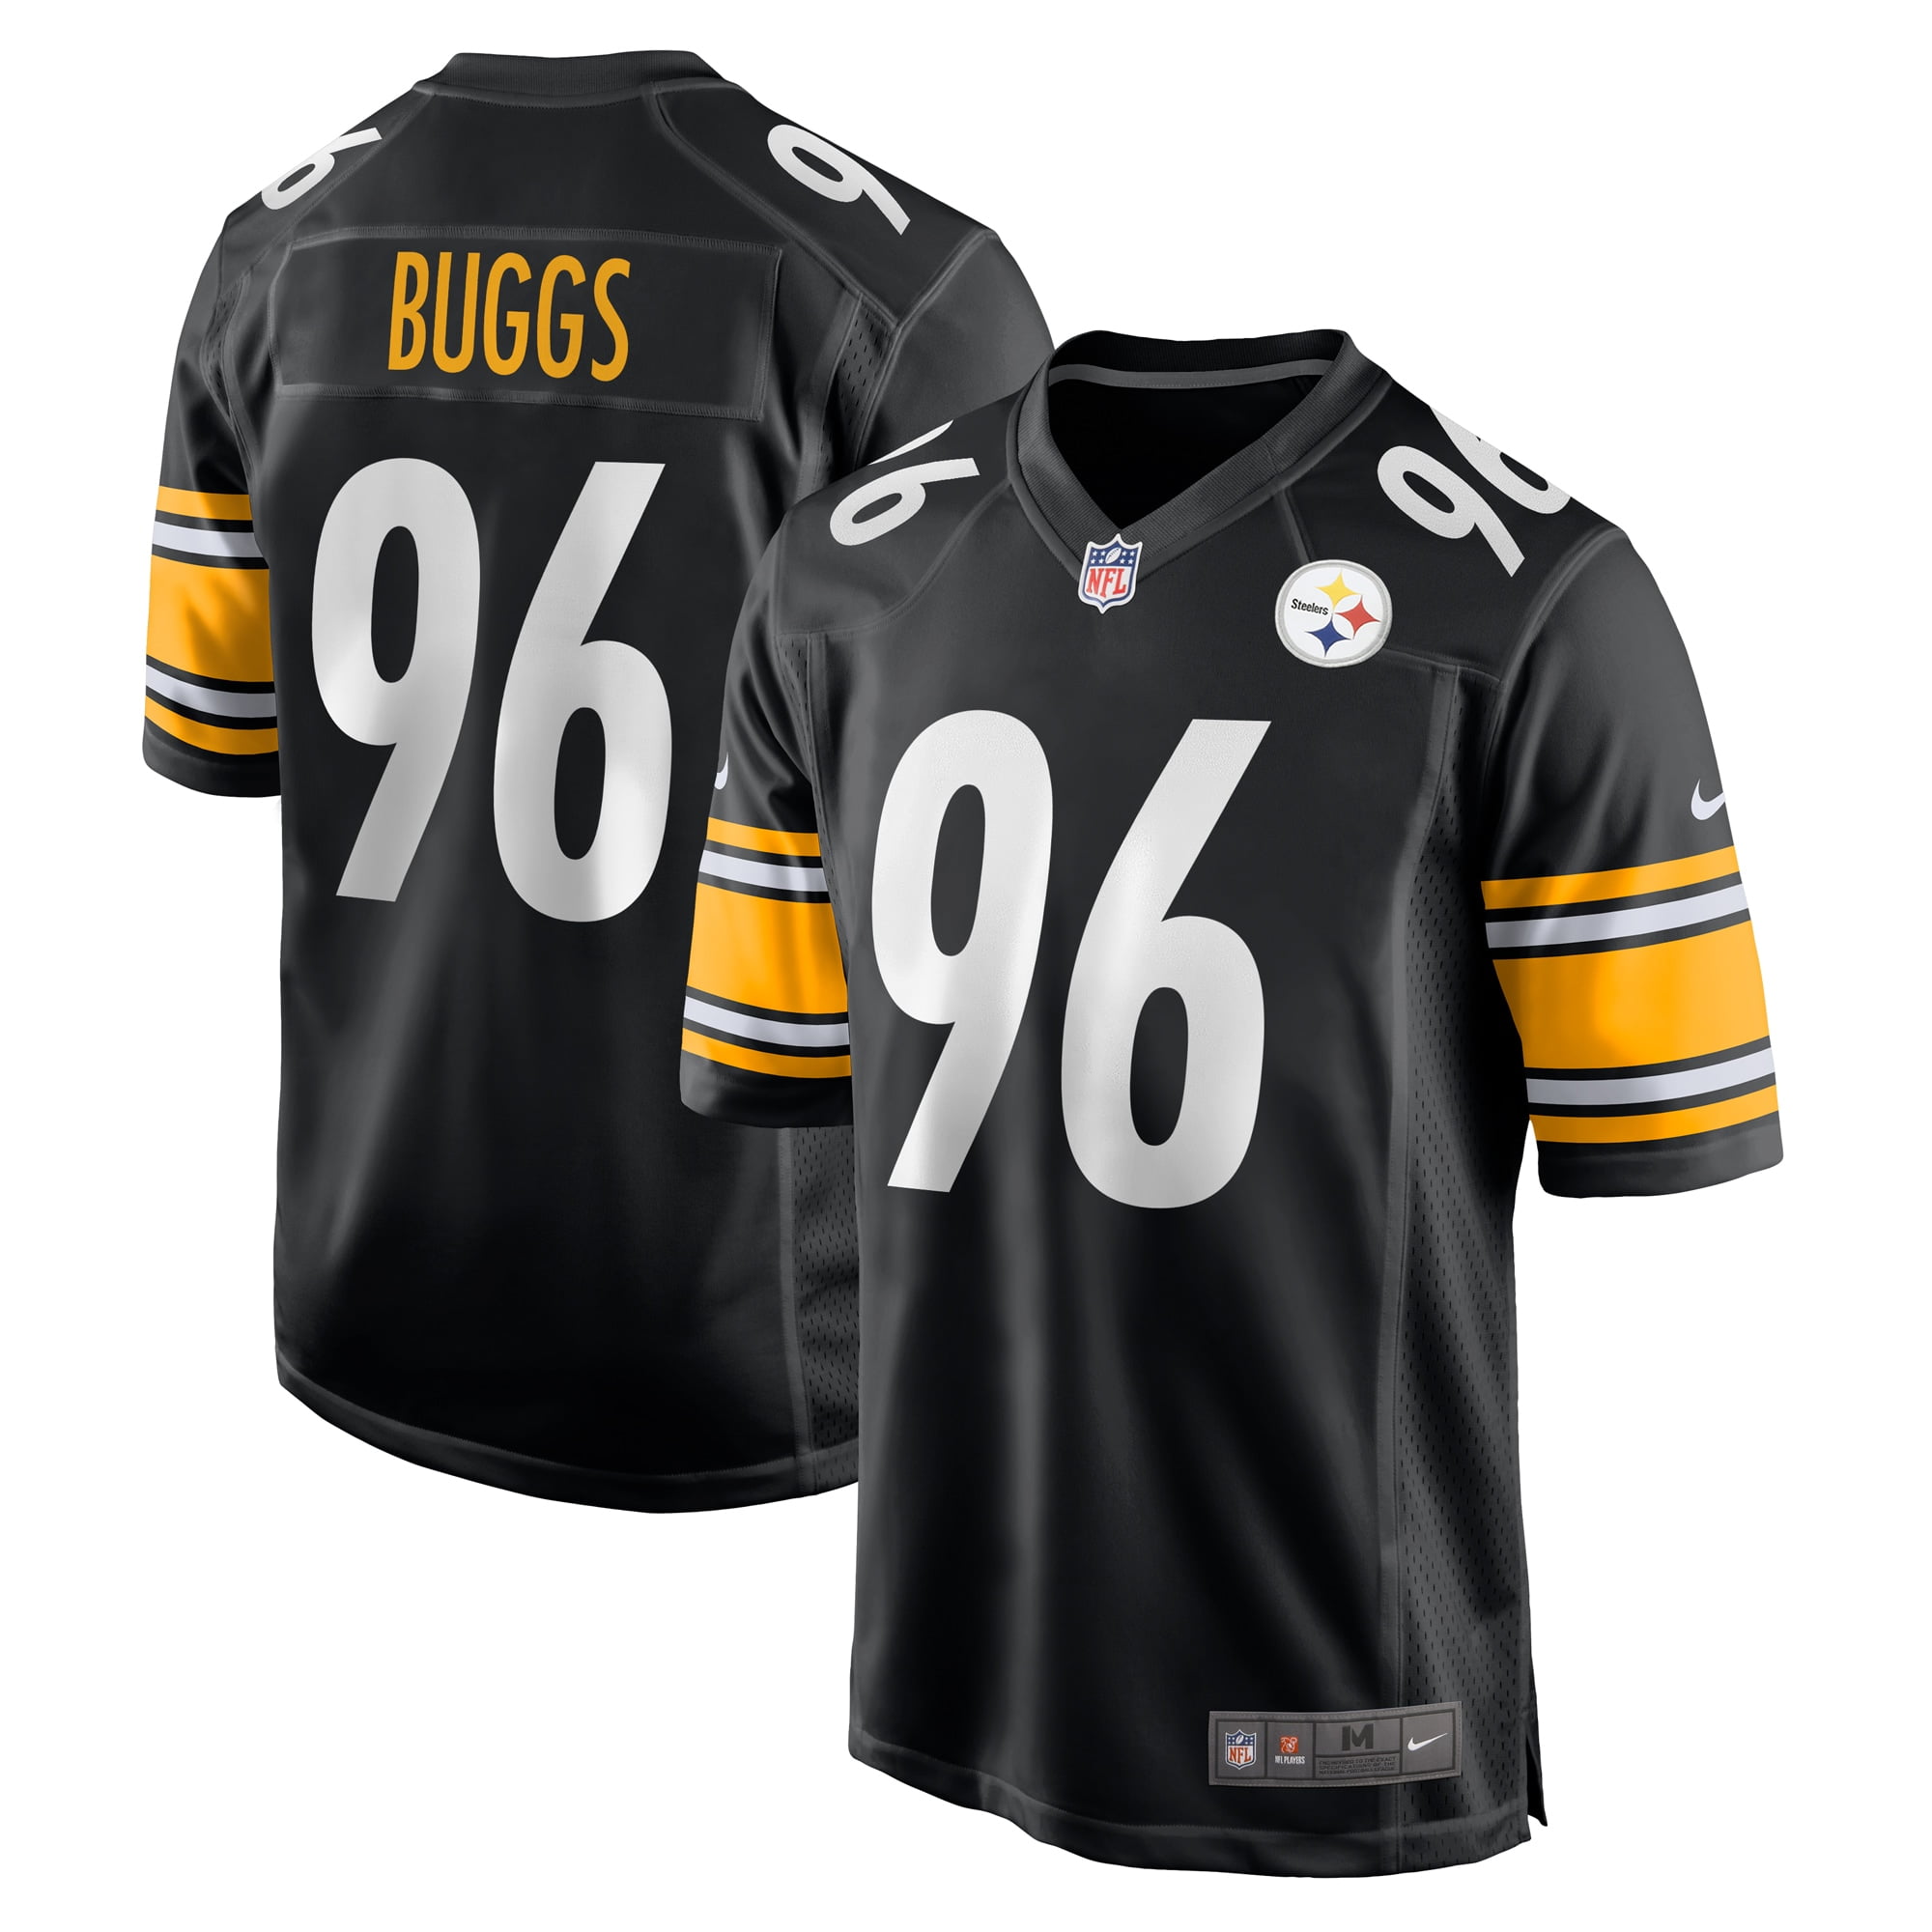 Personalized Name & Number FREE US SHIPPING Pittsburgh Steelers Jersey Poster 